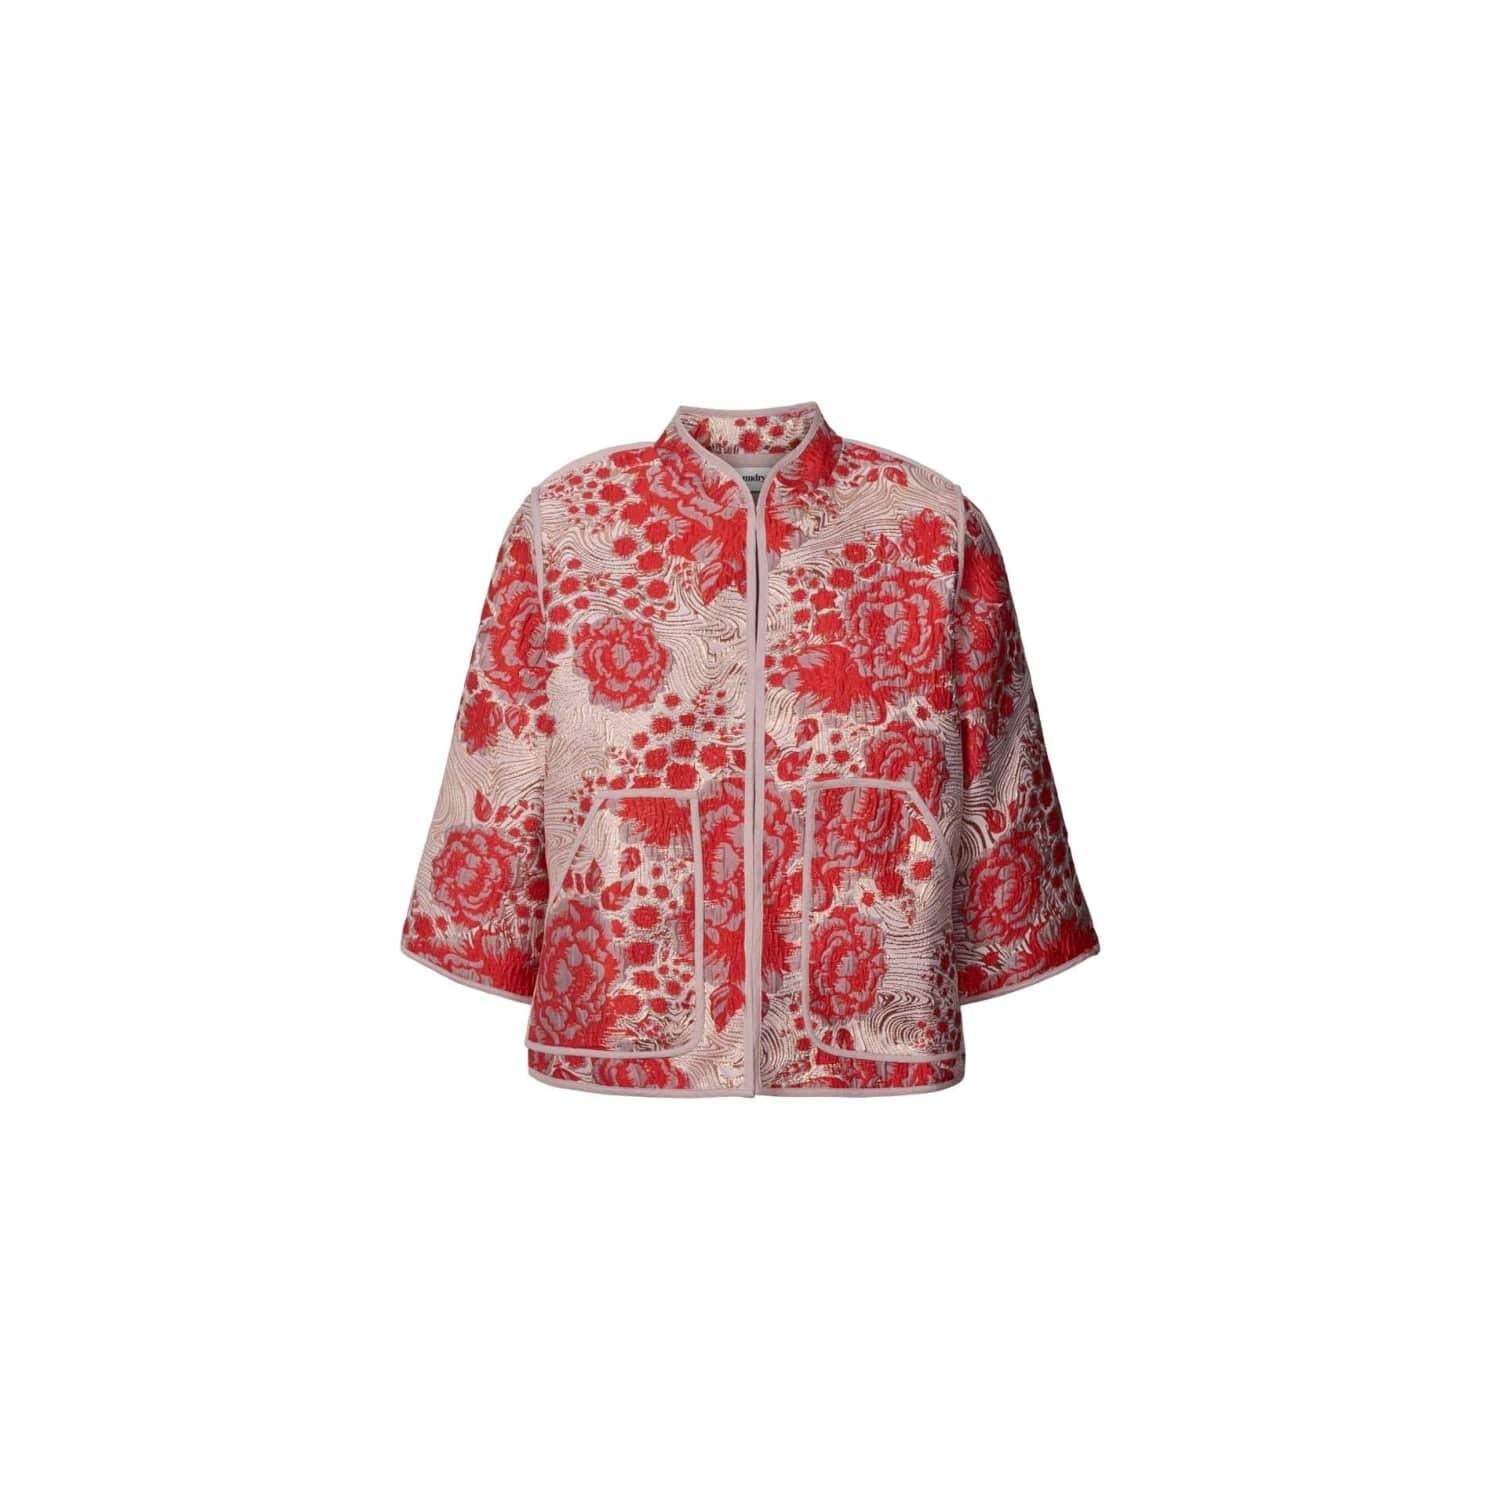 Lolly's Laundry Miriam Jacket in Red | Lyst